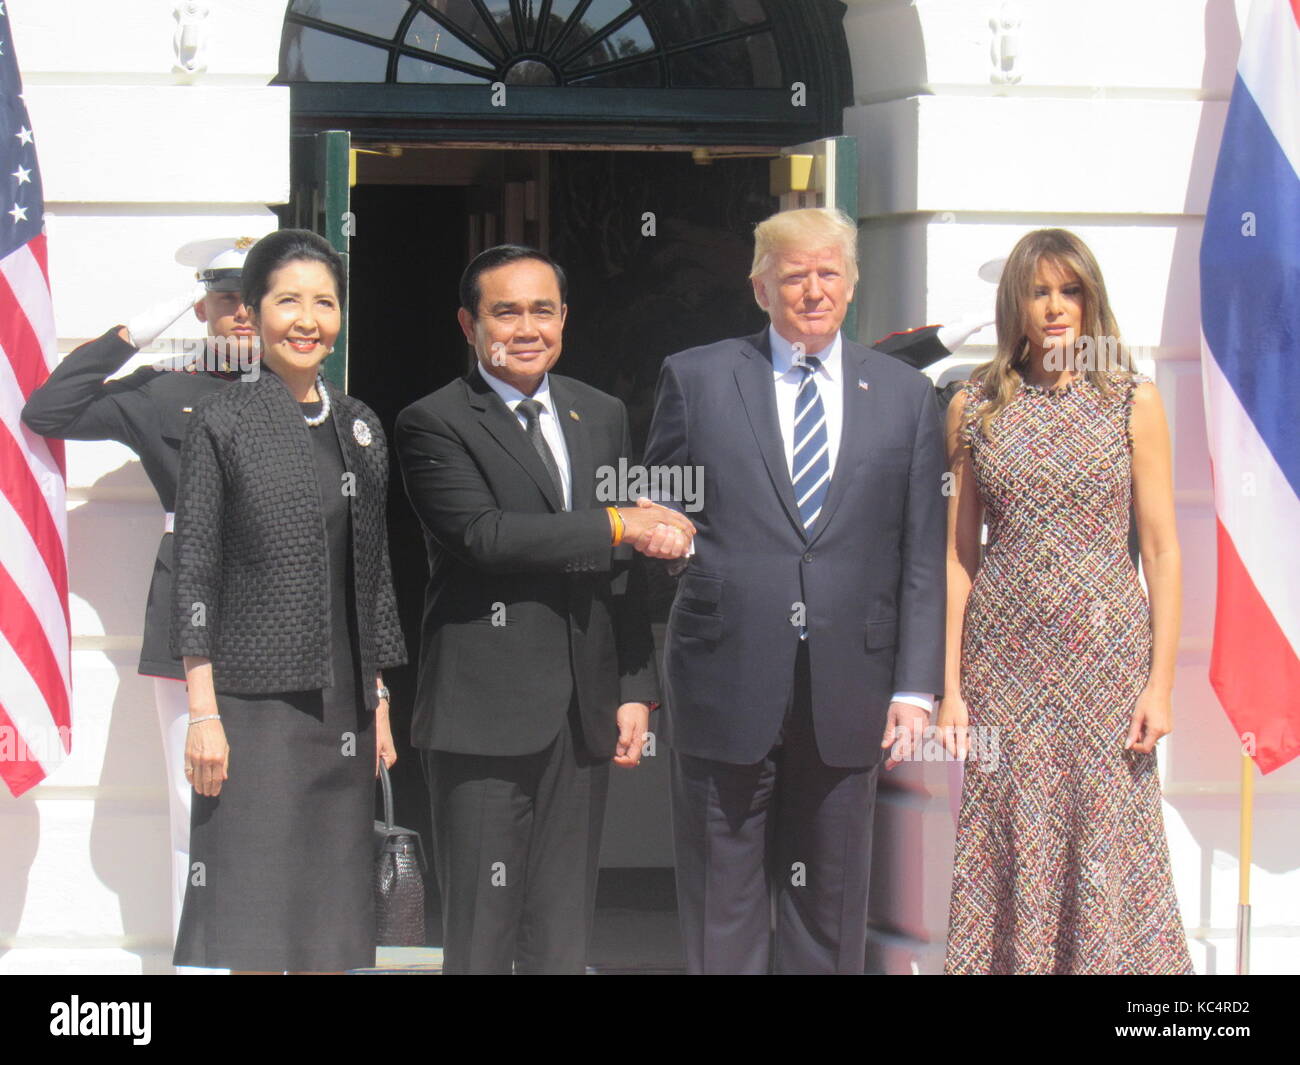 Washington, DC, USA; 02nd October, 2017: President Trump and First Lady Melania Trump welcome Prime Minister Prayut Chan-o-cha and Madam Chan-o-Cha of Thailand at the White House in Washington, DC, USA. Credit: Kyle Mazza/Alamy Live News. Stock Photo